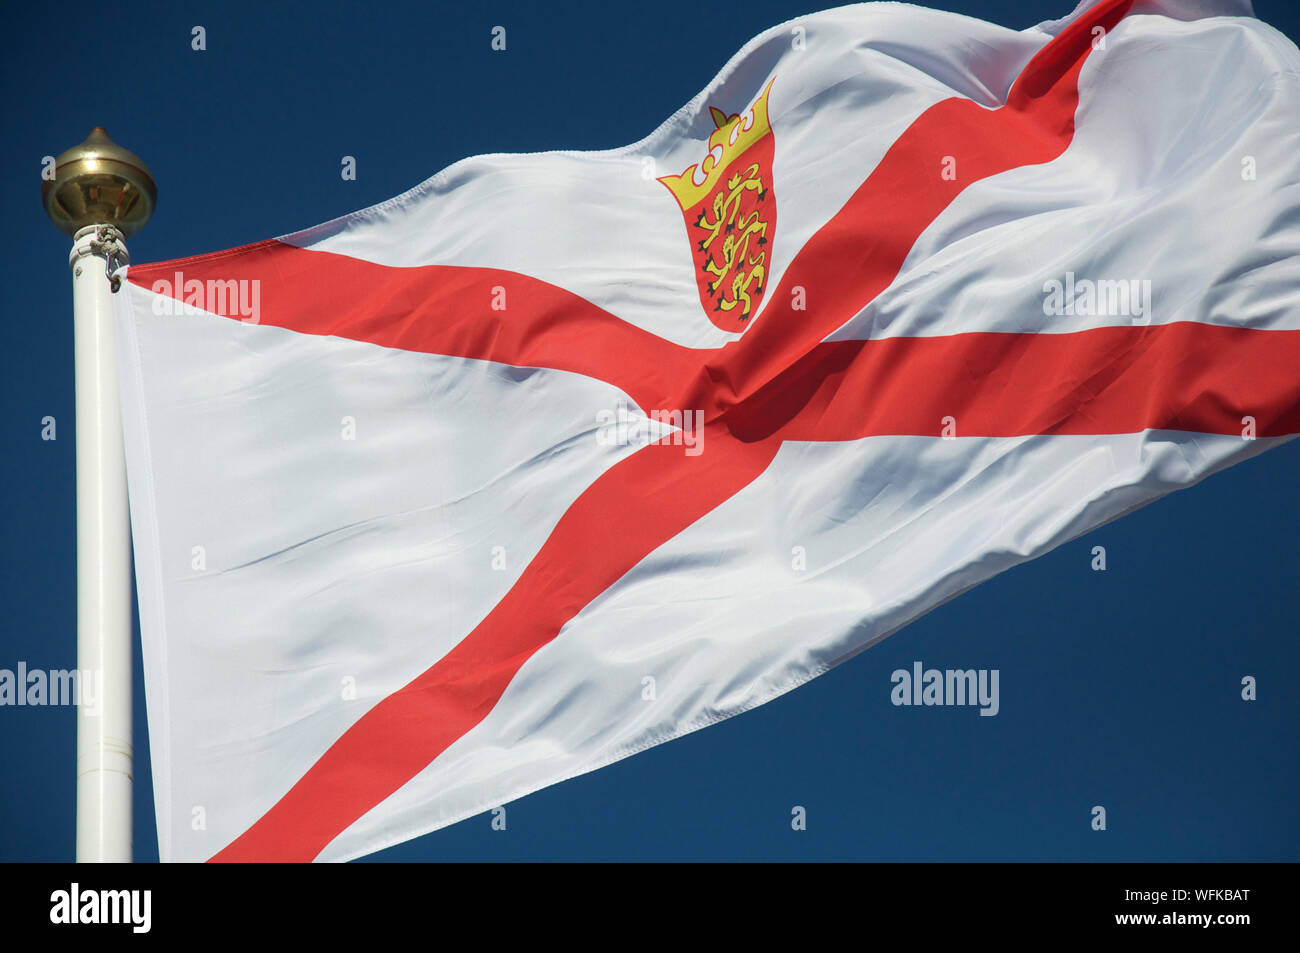 The flag of the States of Jersey blowing in the wind against a blue sky. The Bailiwick of Jersey is the largest of the Channel Islands. British Isles. Stock Photo